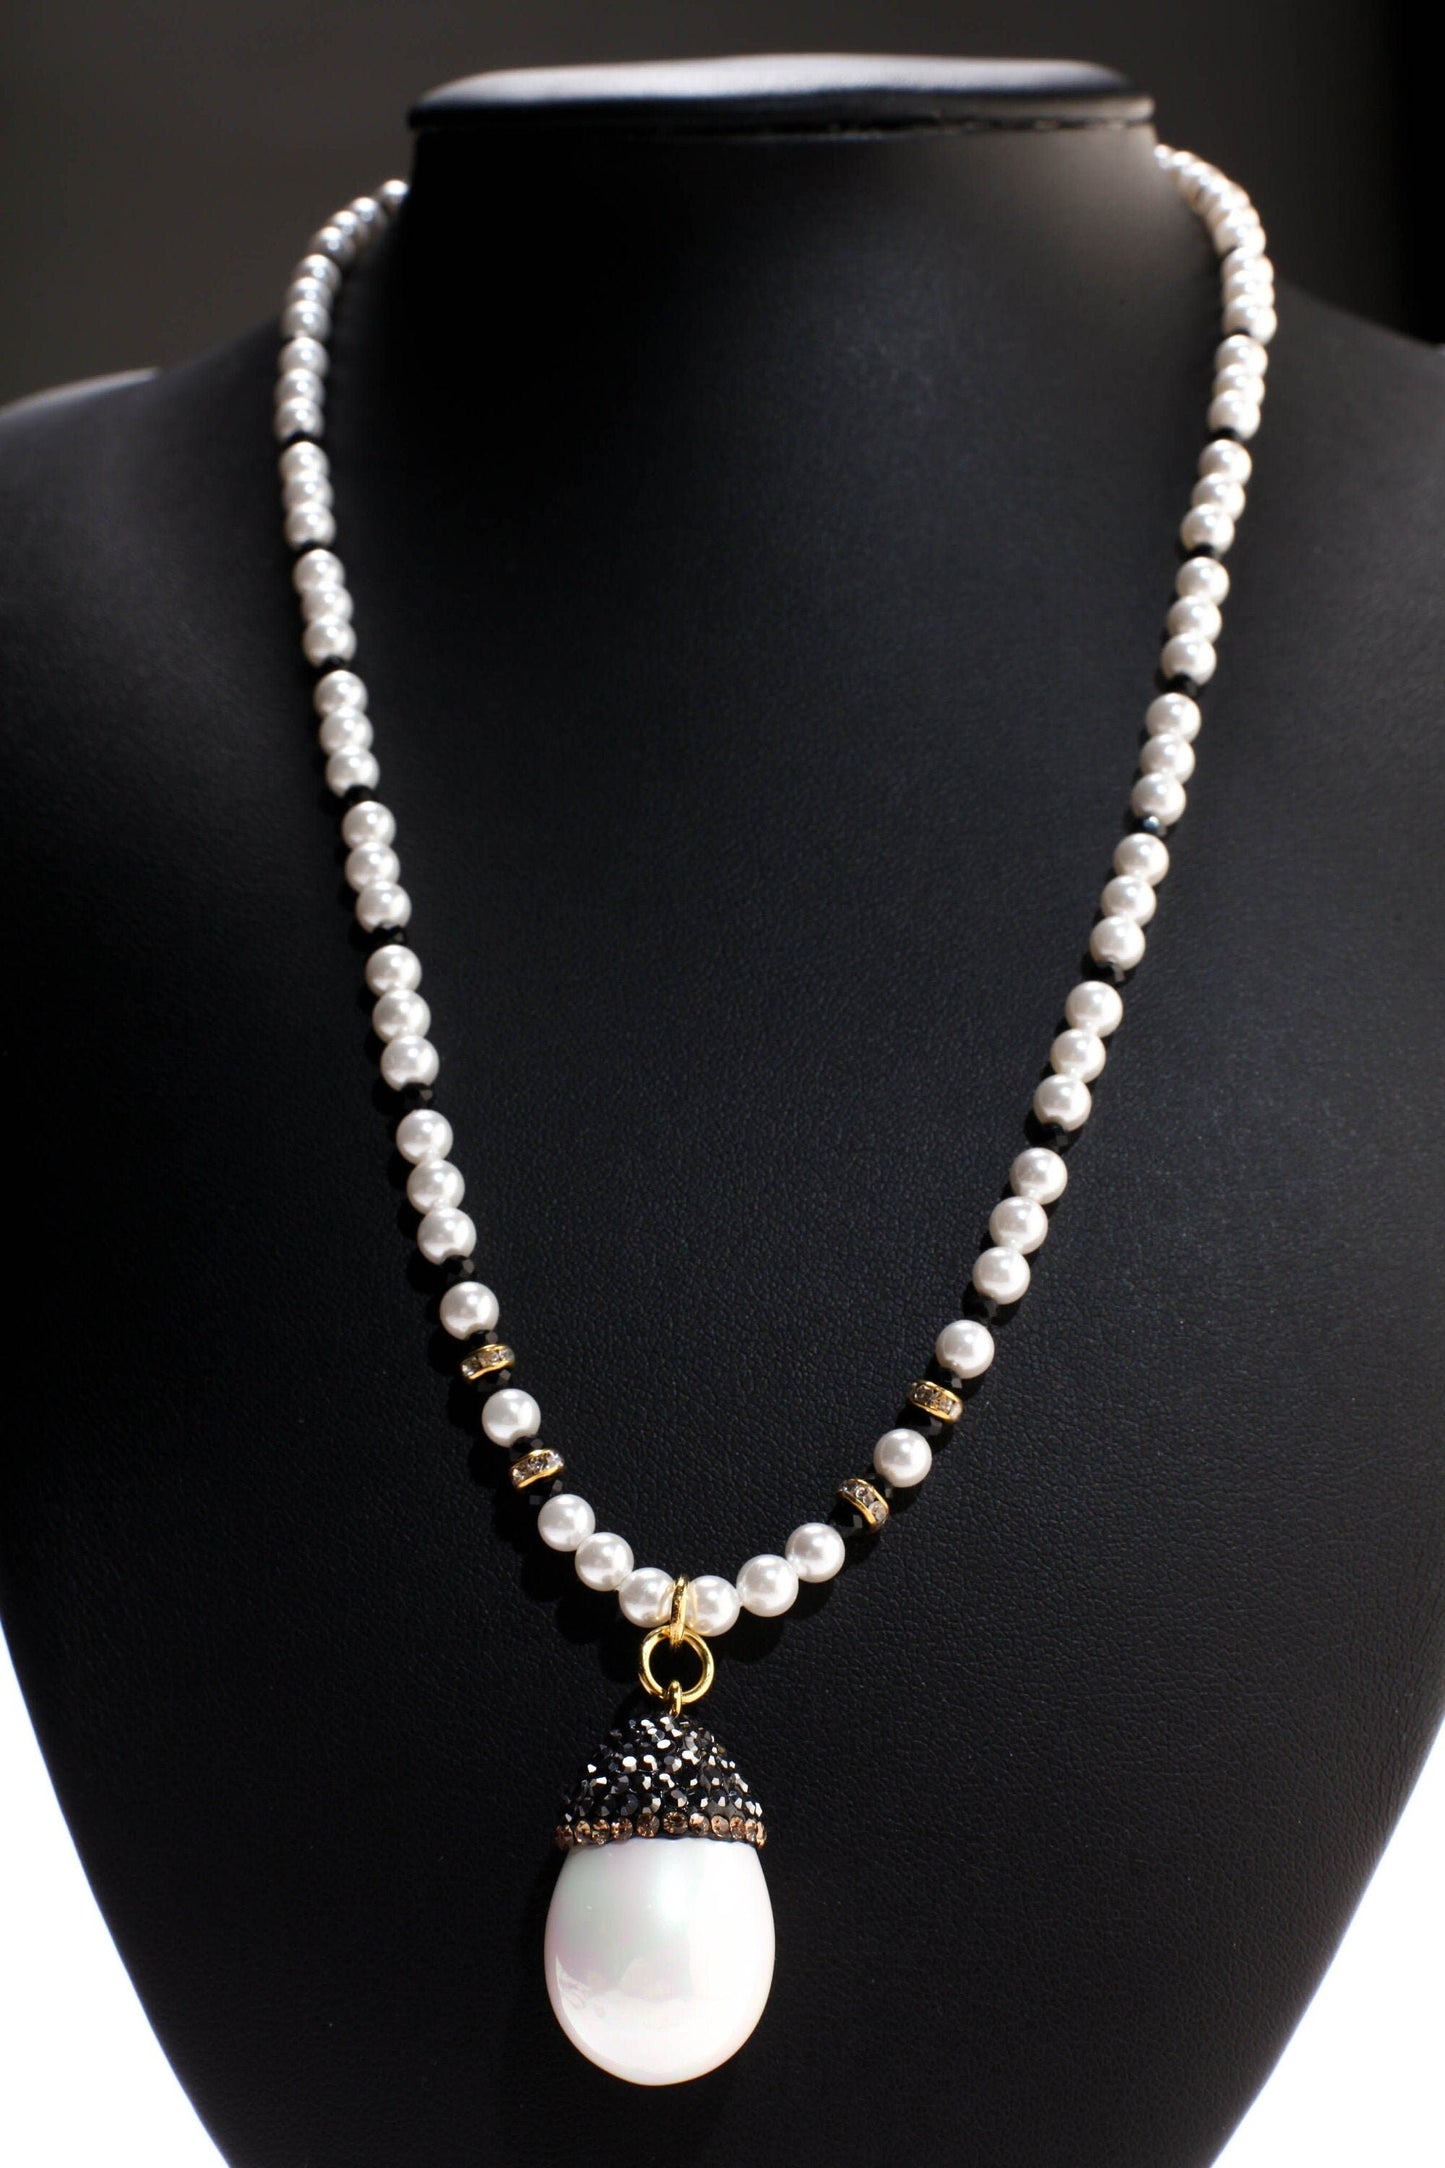 South Sea Shell Pearl Bridal Necklace, Tear Drop Pave Crystal Bead Cap Dangling Earrings Sets, Black Spinel Spacers, Gold Clasp Jewelry Set